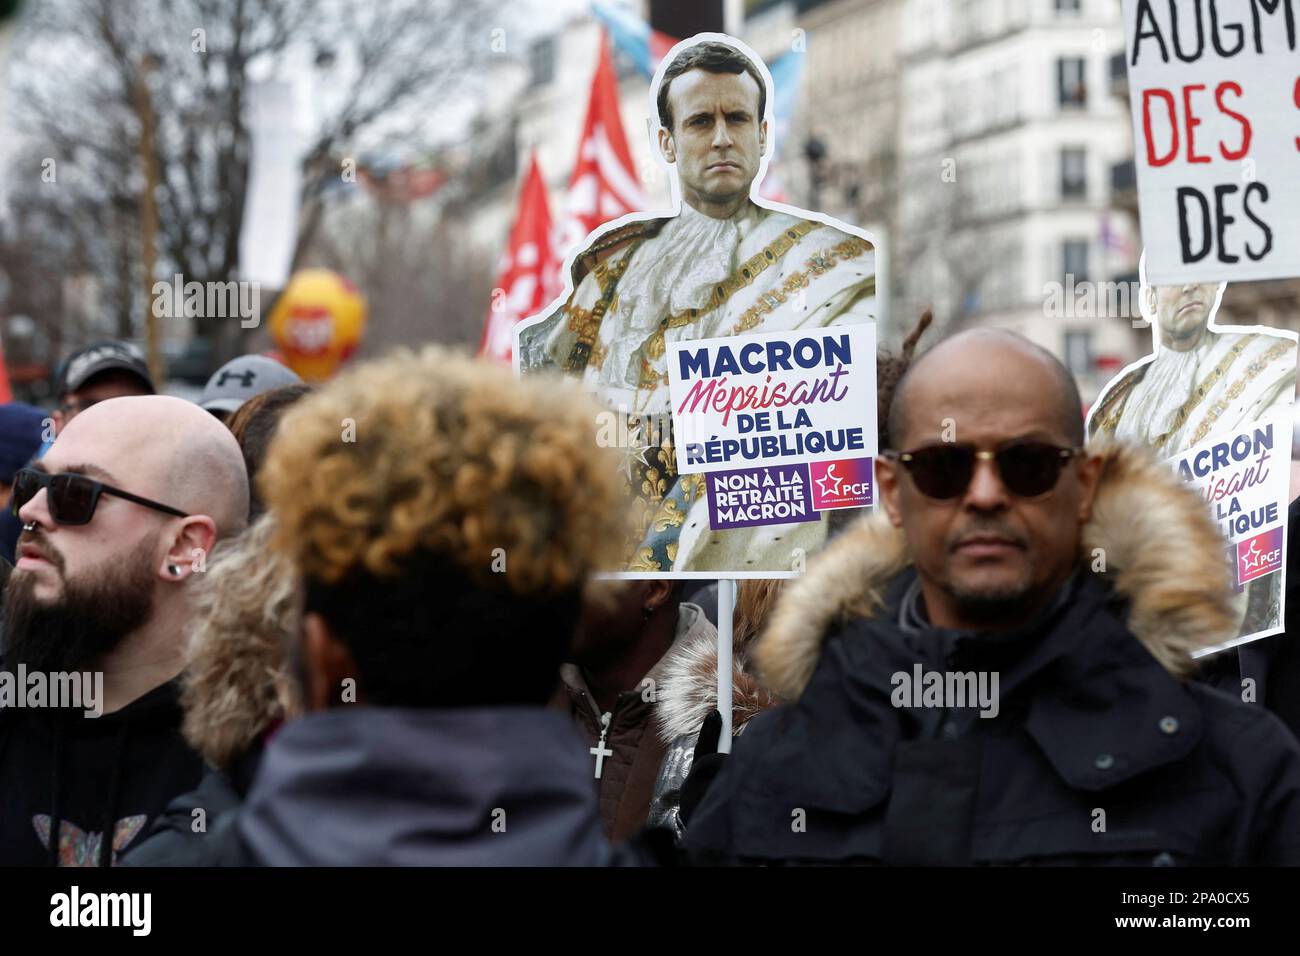 A demonstrator holds a sign with an image of French President Emmanuel Macron at a protest against the government's pension reform plan in Paris, France, March 11, 2023. REUTERS/Benoit Tessier Stock Photo